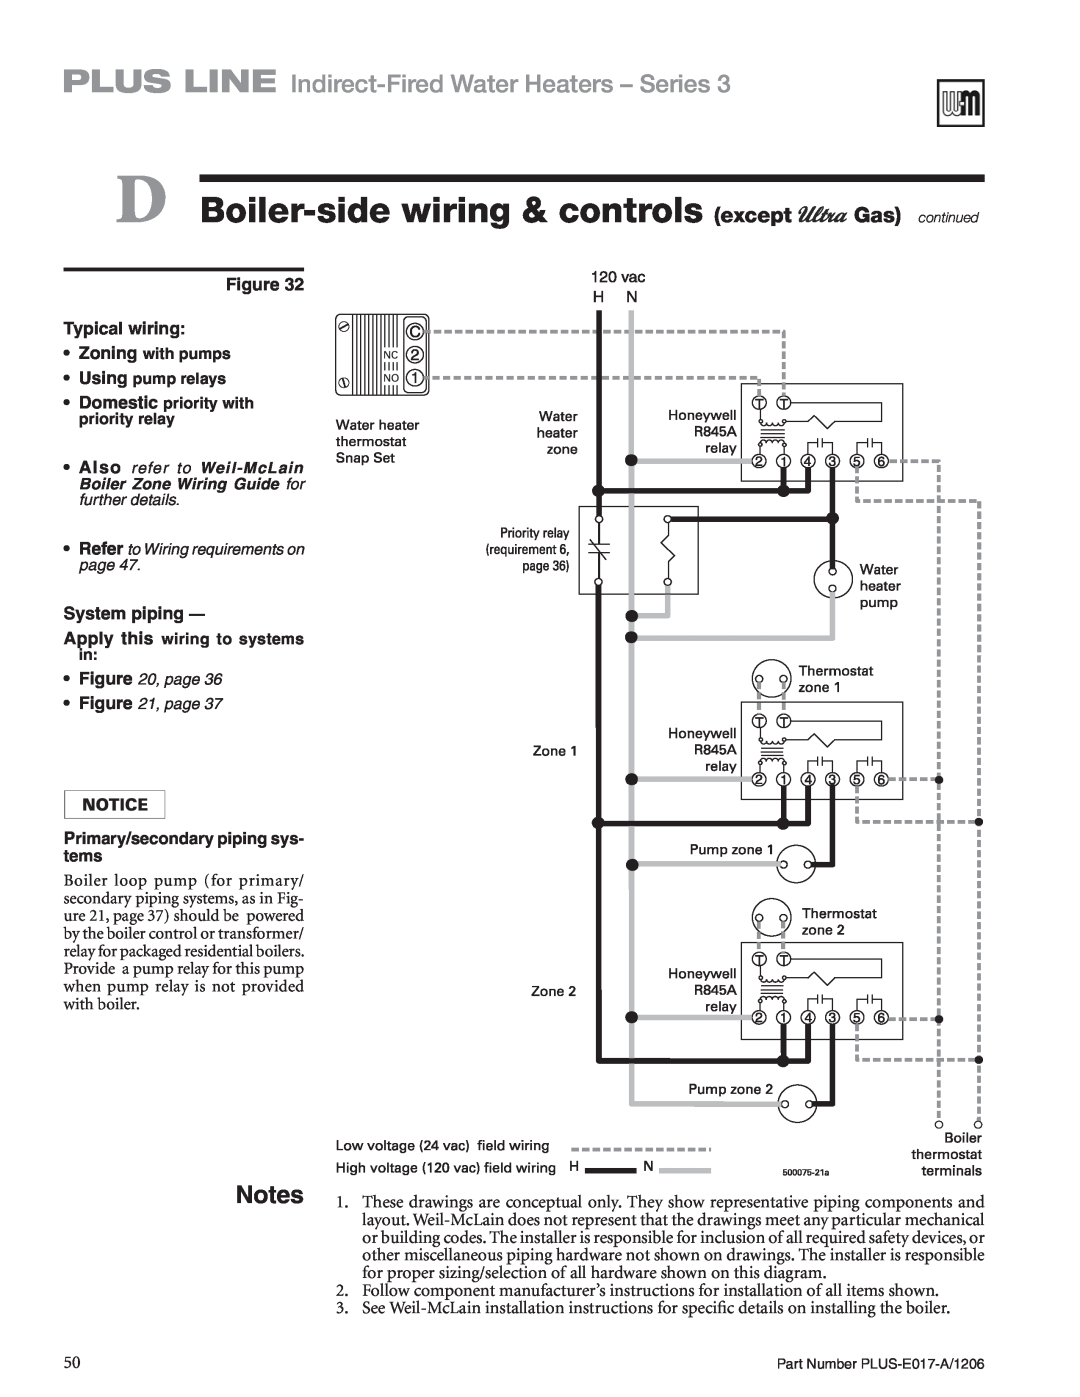 Weil-McLain PLUS-E017-A/1206 manual PLUS LINE Indirect-FiredWater Heaters - Series, Figure Typical wiring, System piping 